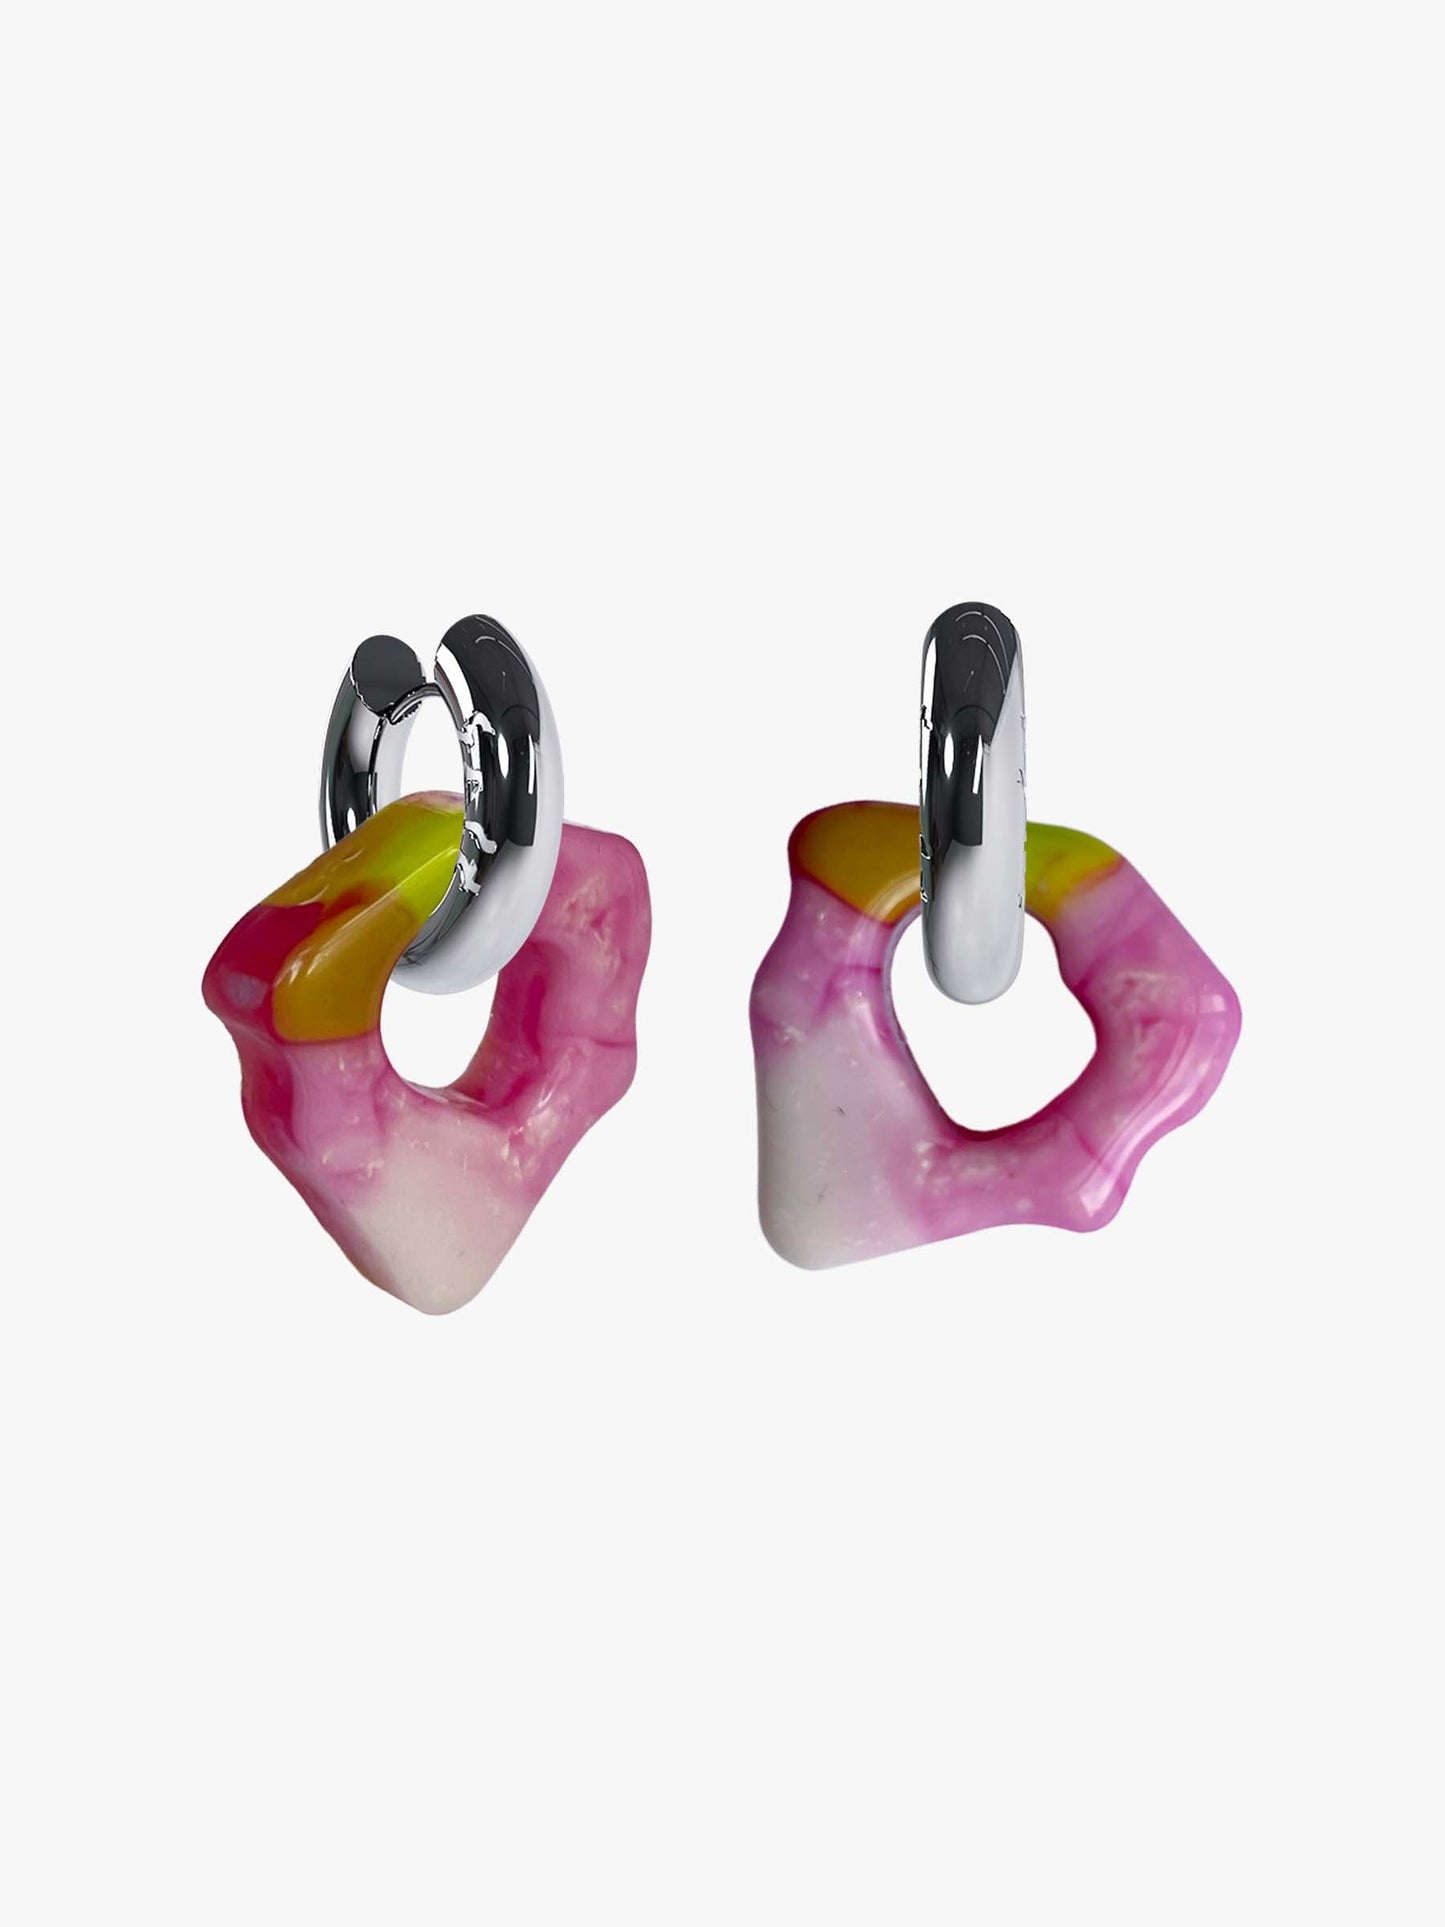 Ora marble pink green silver earring (pair)